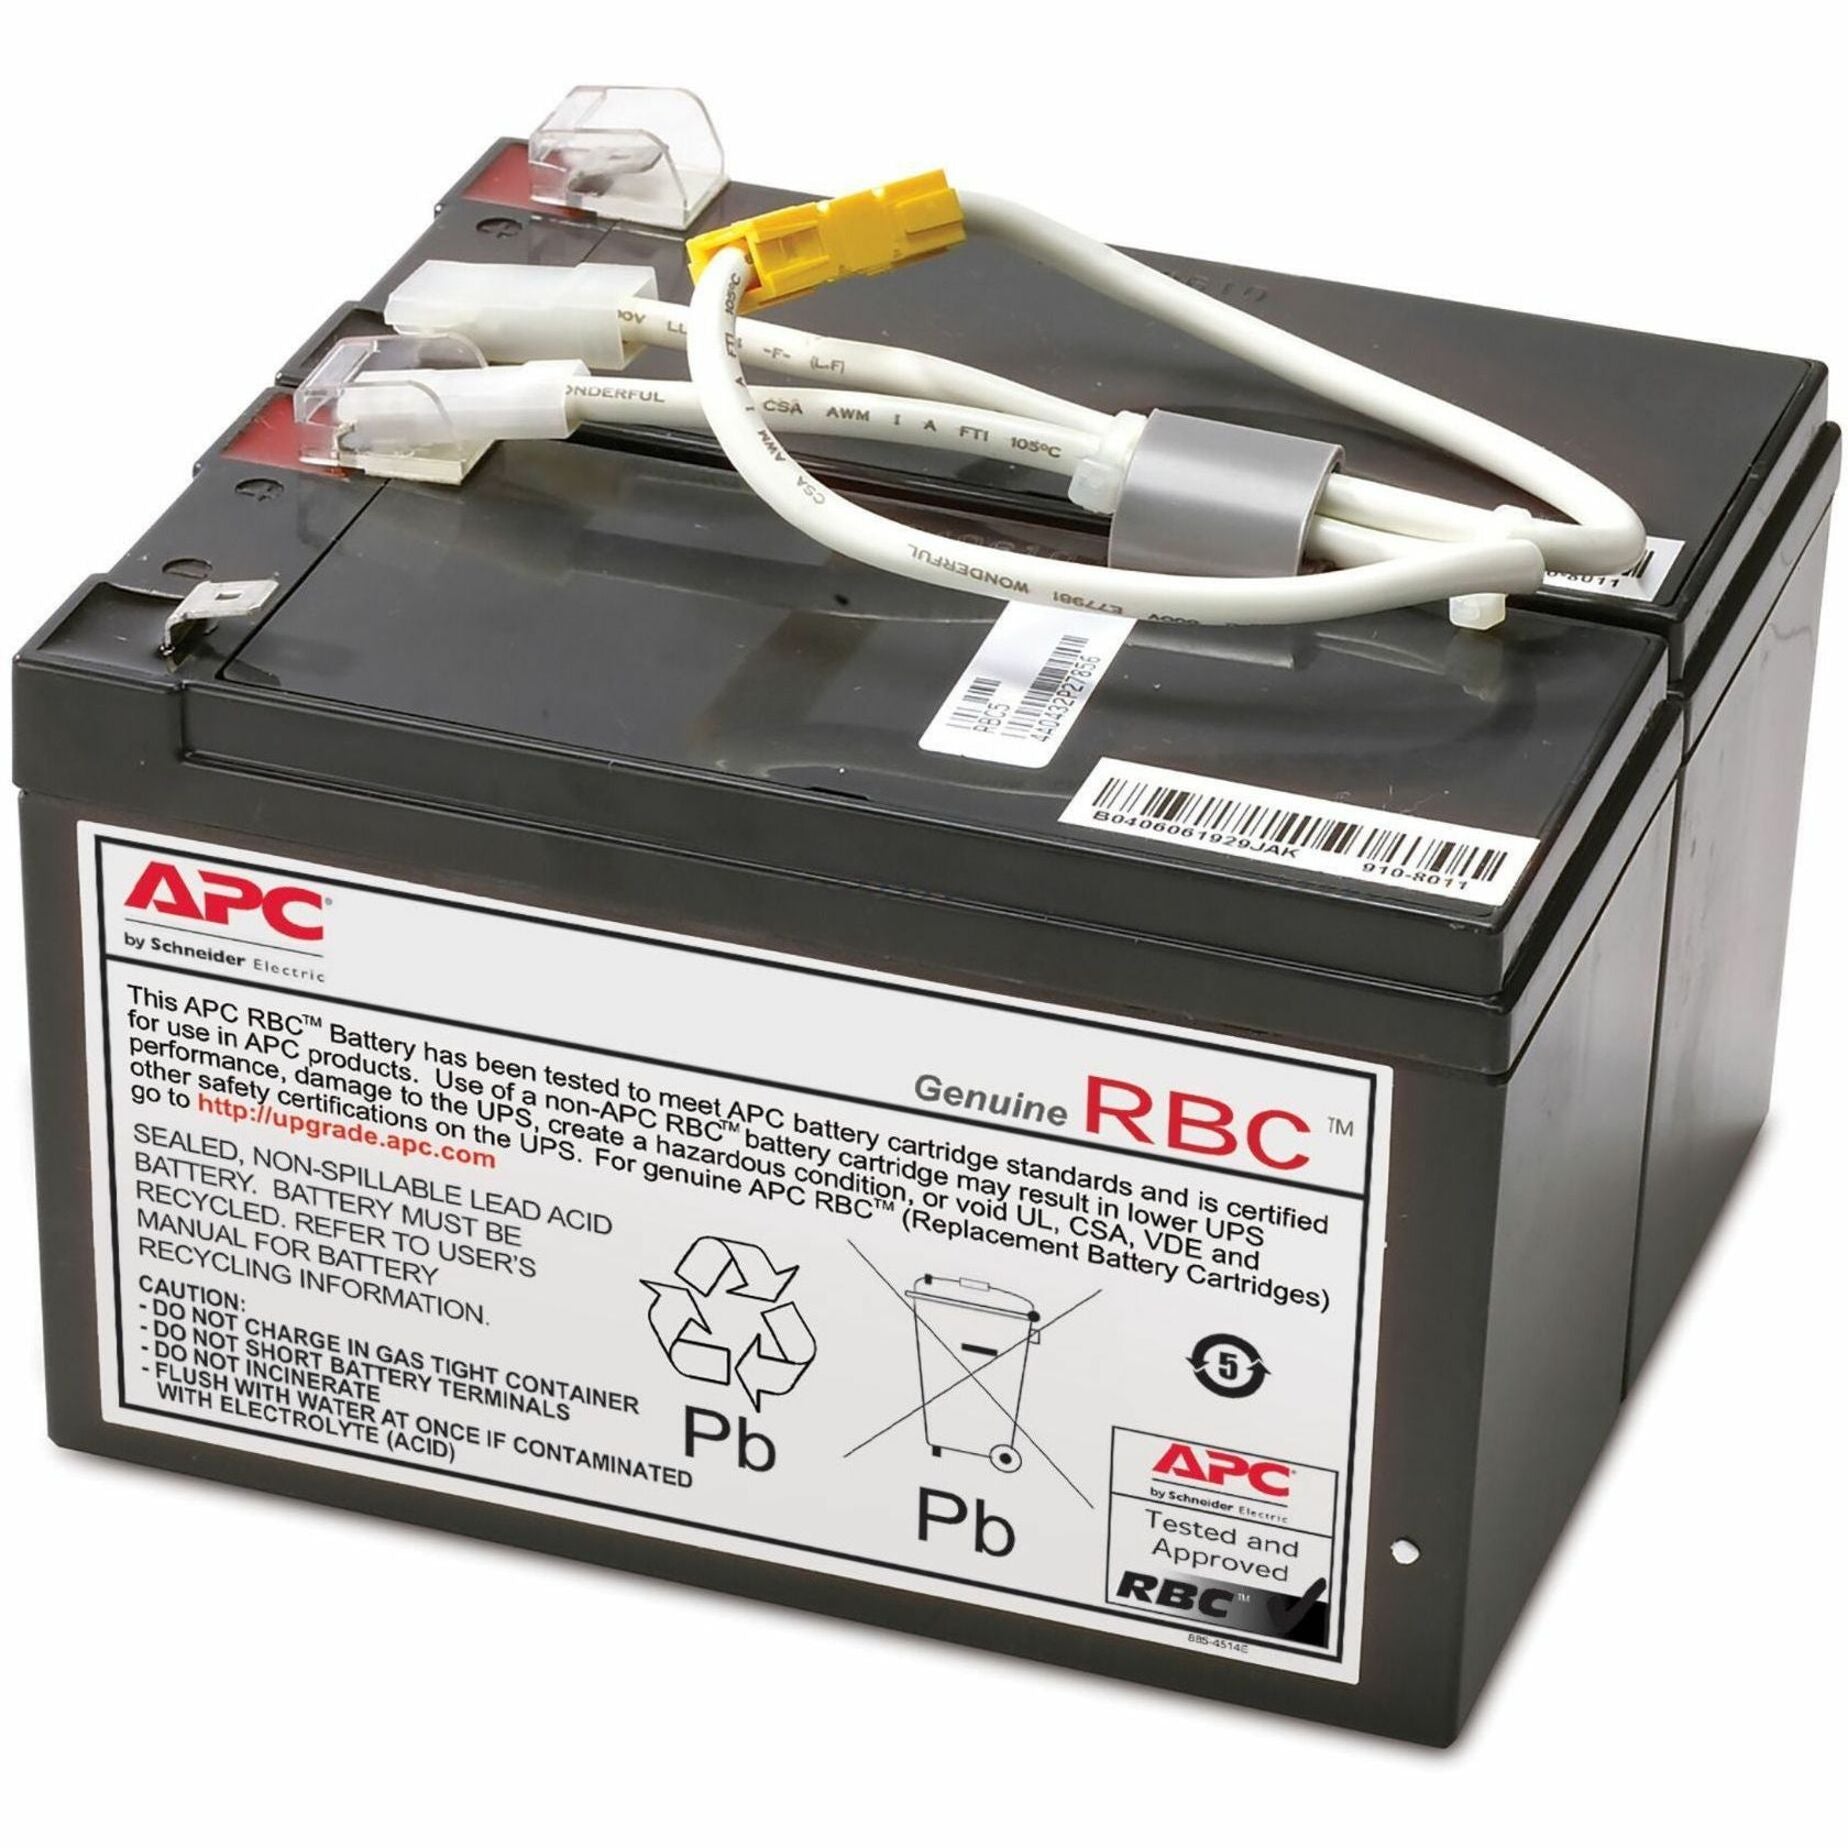 APC APCRBC109 9VAh UPS Replacement Battery Cartridge #109, 2 Year Warranty, Hot Swappable